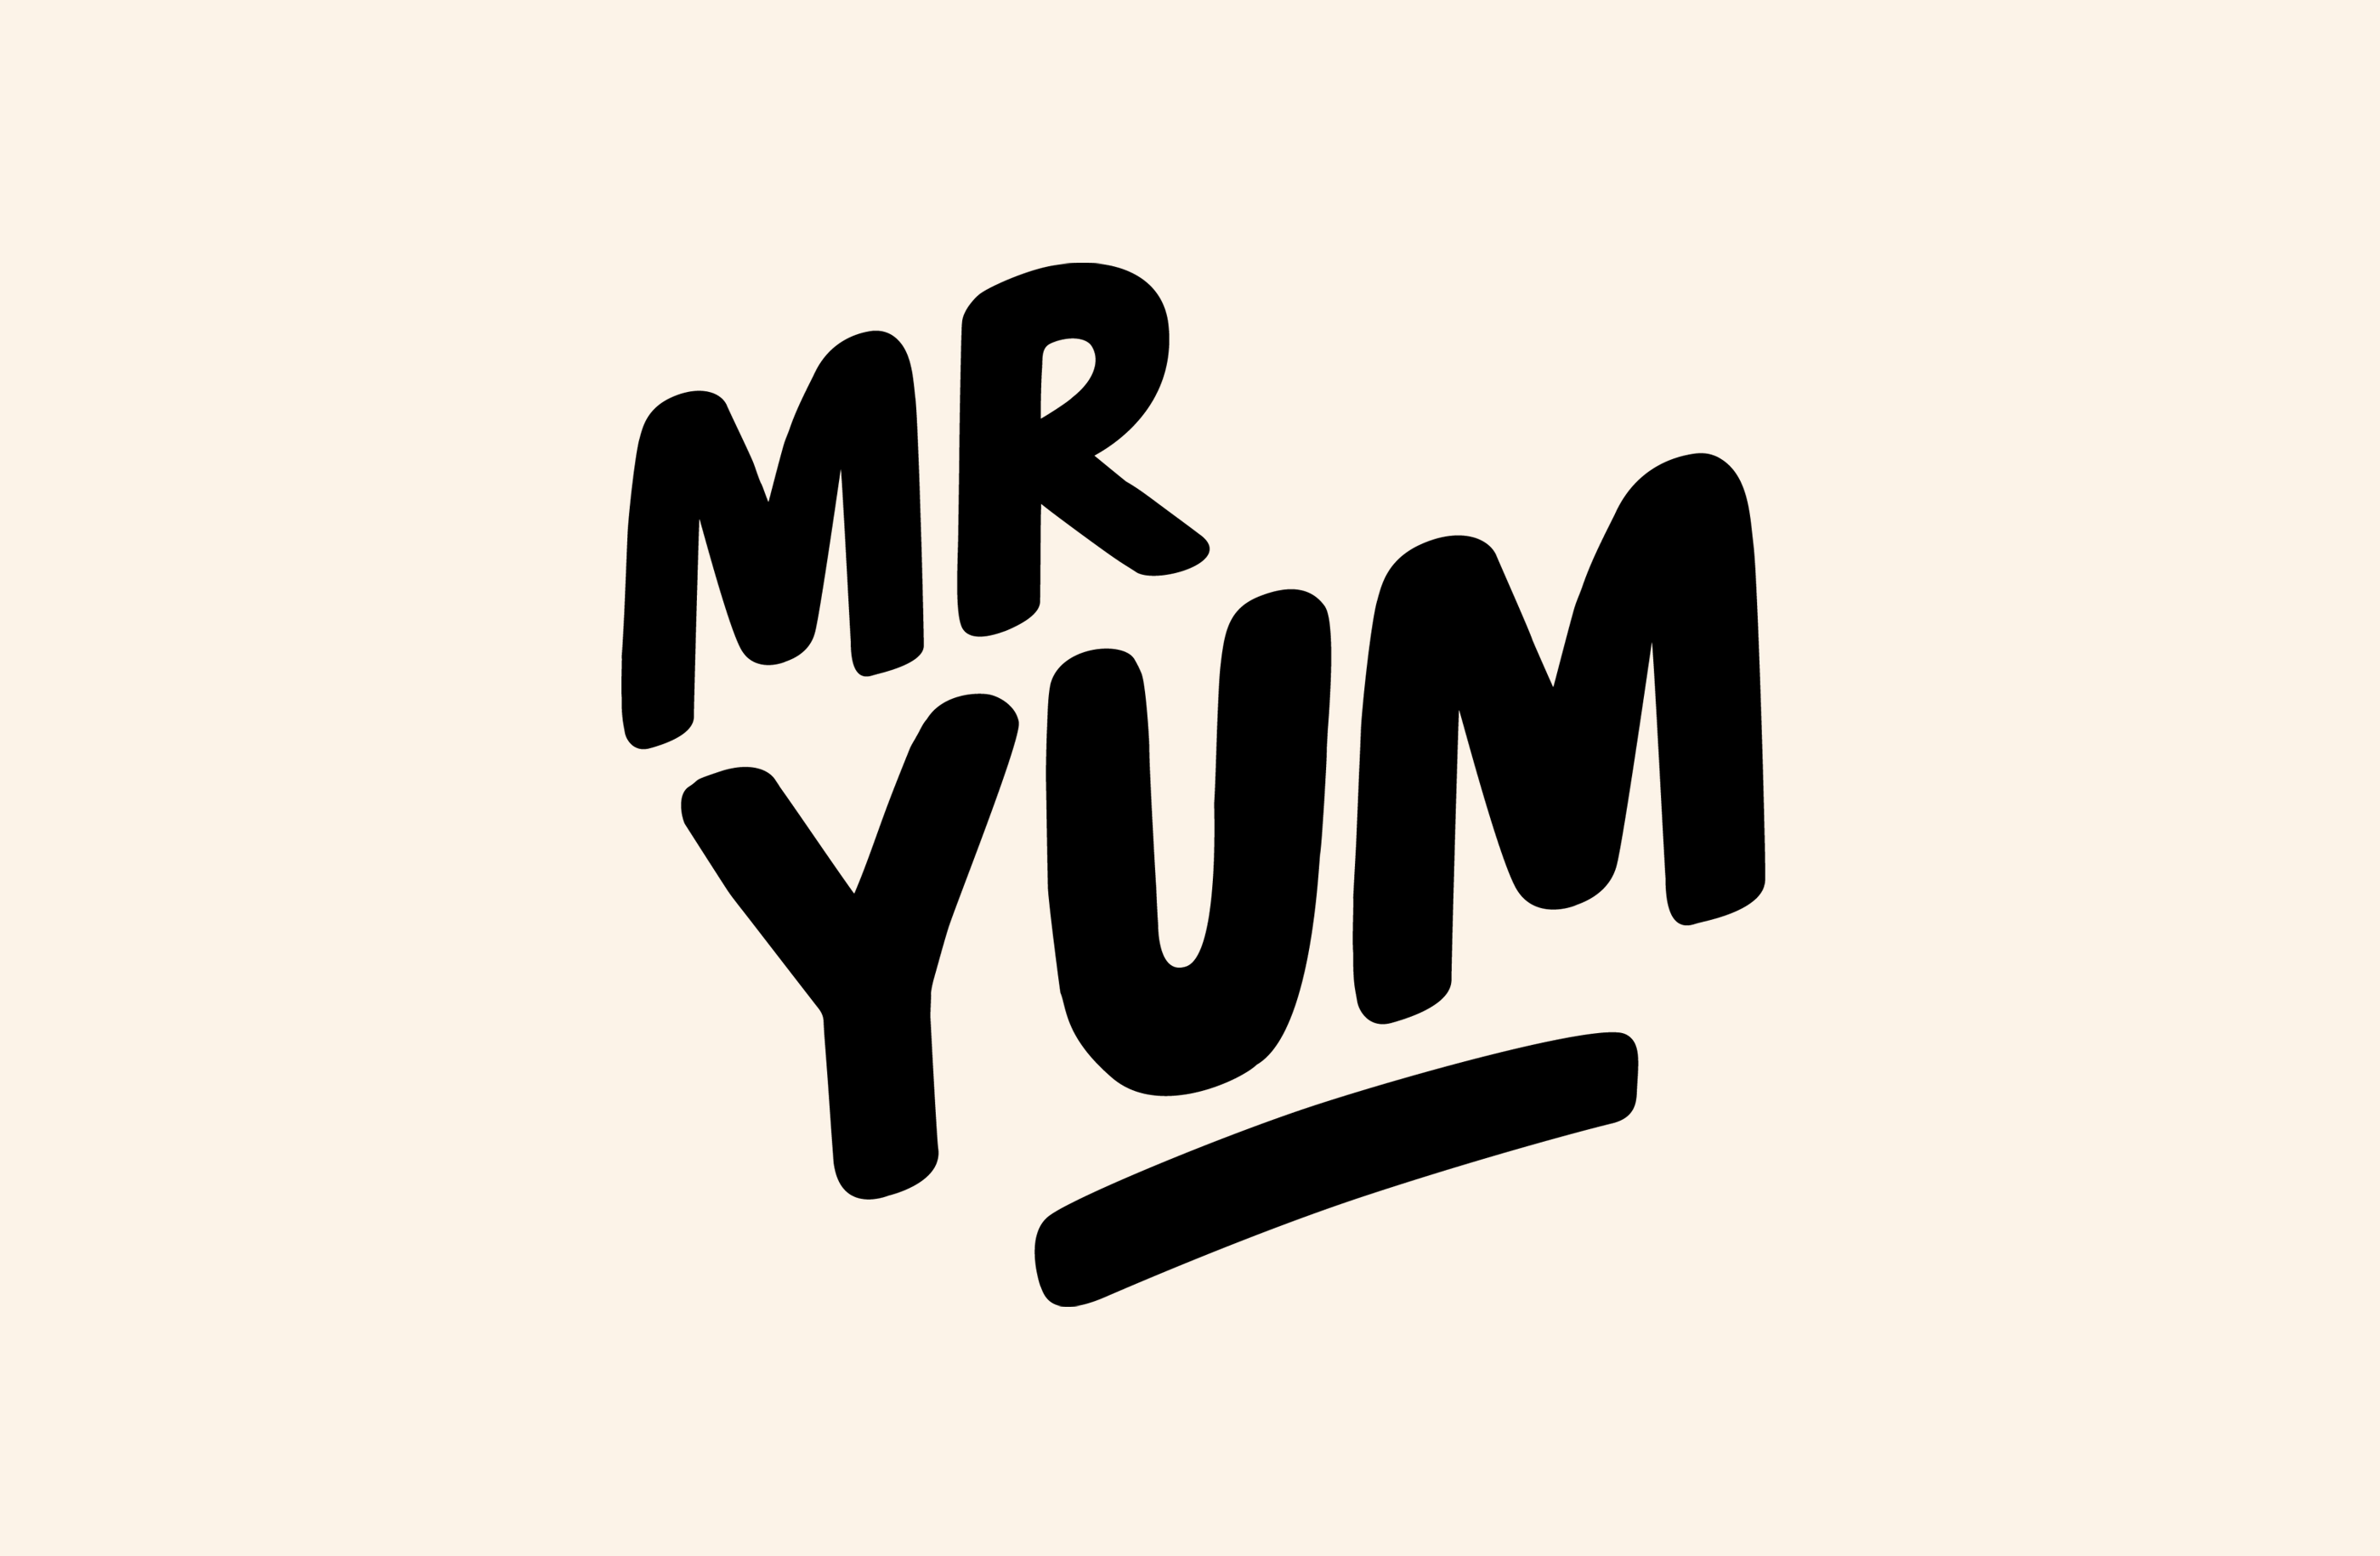 Logo, social media assets, custom typeface and iconography by RE for Mr Yum, a tech payment platform for food brands and hospitality businesses